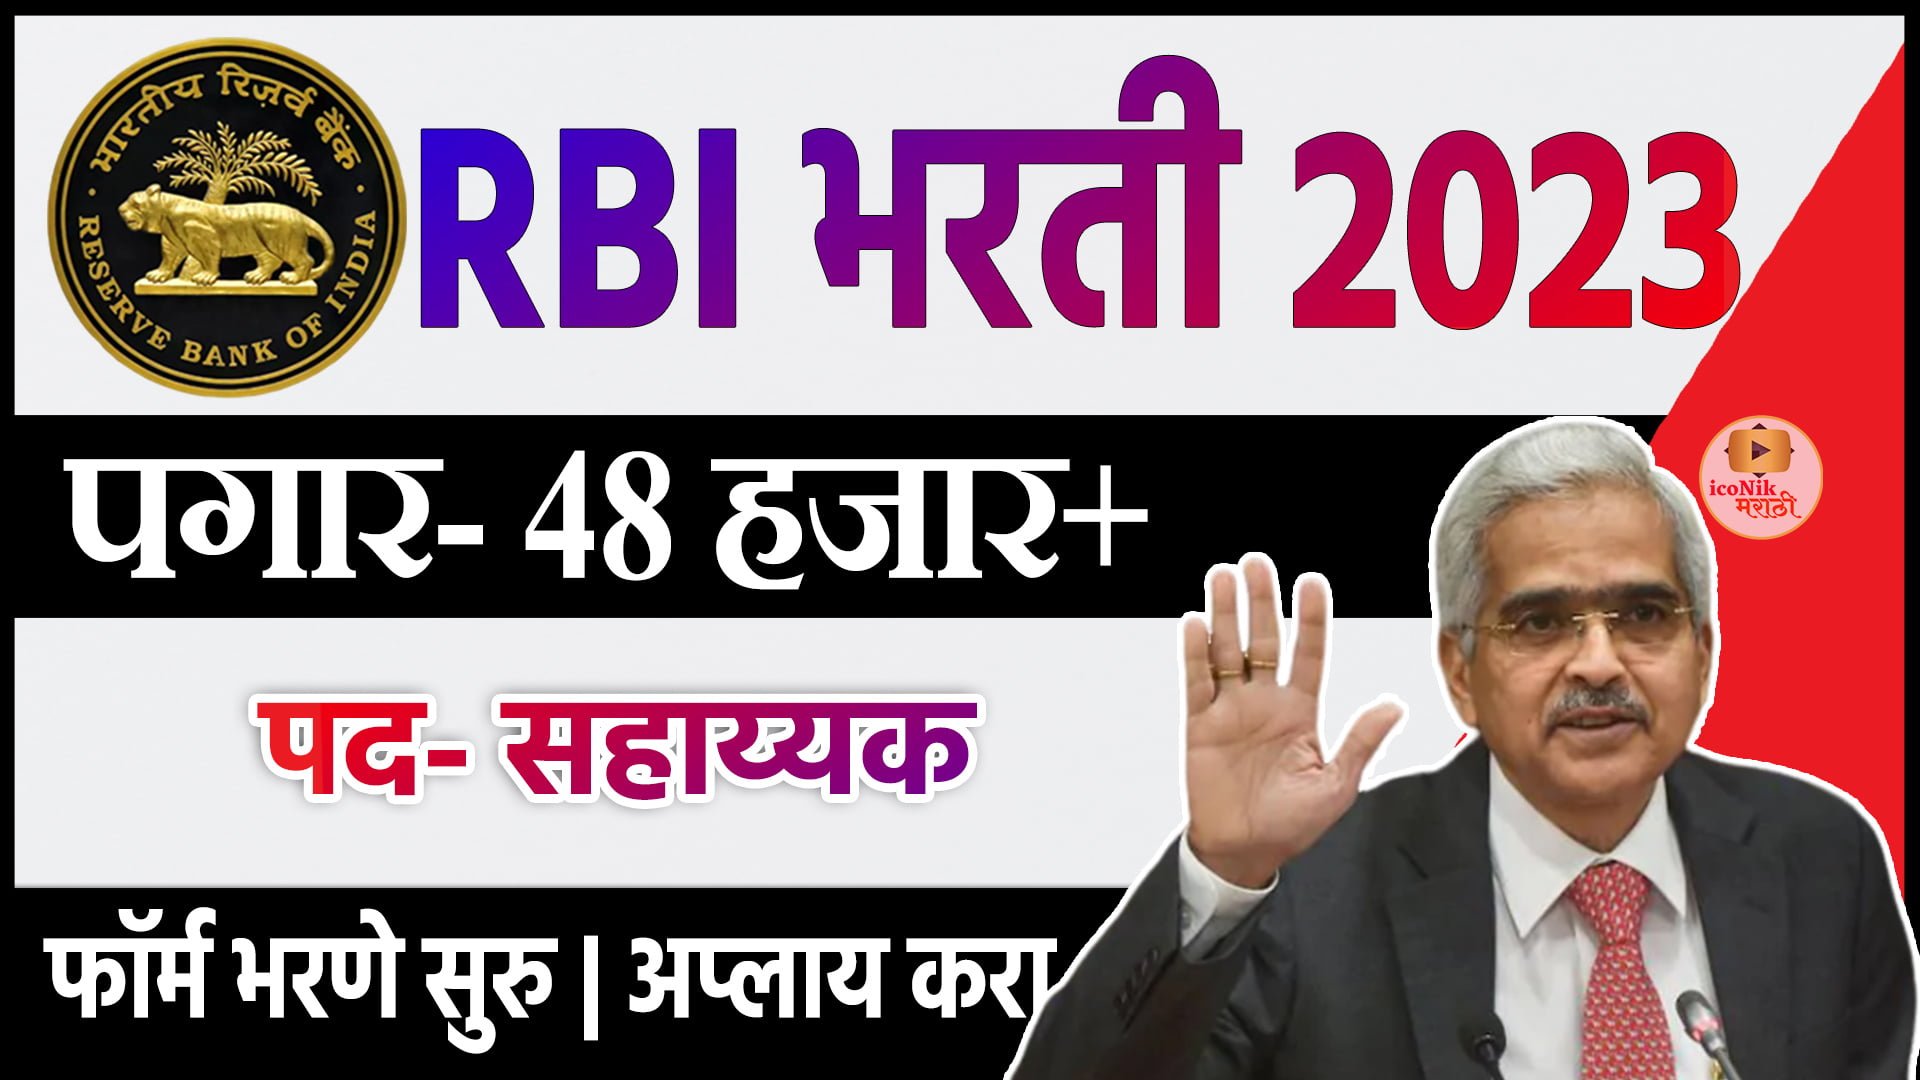 RBI ASSISTANT 2023 NOTIFICATION IN Marathi